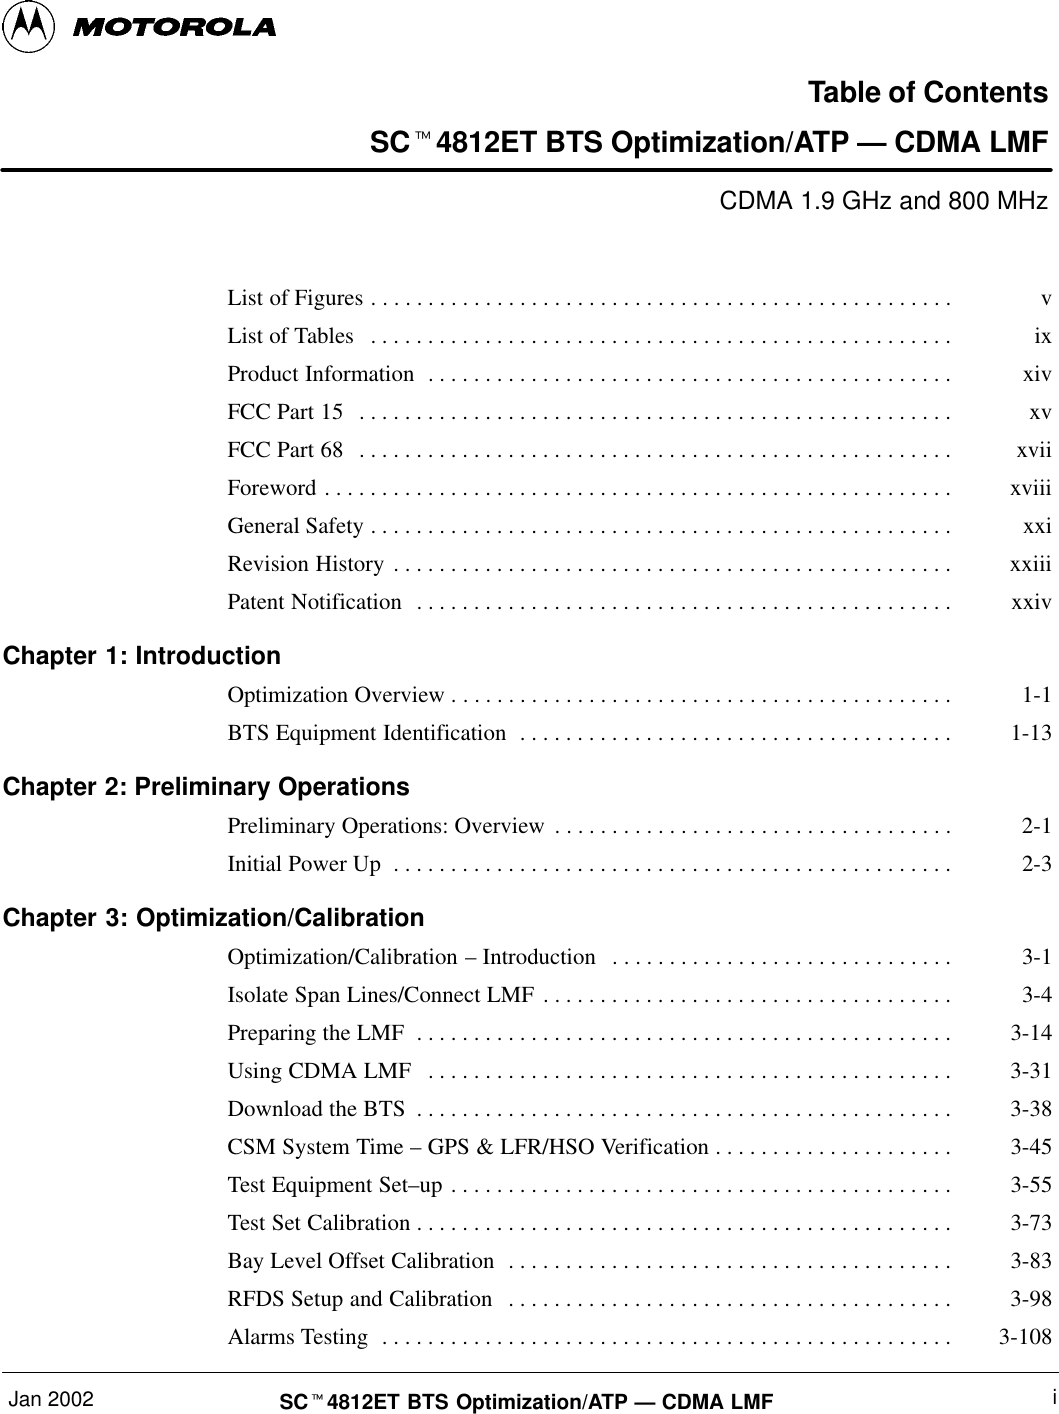 Jan 2002 iSCt4812ET BTS Optimization/ATP — CDMA LMFTable of ContentsSCt4812ET BTS Optimization/ATP — CDMA LMFCDMA 1.9 GHz and 800 MHzList of Figures v. . . . . . . . . . . . . . . . . . . . . . . . . . . . . . . . . . . . . . . . . . . . . . . . . . . List of Tables ix. . . . . . . . . . . . . . . . . . . . . . . . . . . . . . . . . . . . . . . . . . . . . . . . . . . Product Information xiv. . . . . . . . . . . . . . . . . . . . . . . . . . . . . . . . . . . . . . . . . . . . . . FCC Part 15 xv. . . . . . . . . . . . . . . . . . . . . . . . . . . . . . . . . . . . . . . . . . . . . . . . . . . . FCC Part 68 xvii. . . . . . . . . . . . . . . . . . . . . . . . . . . . . . . . . . . . . . . . . . . . . . . . . . . . Foreword xviii. . . . . . . . . . . . . . . . . . . . . . . . . . . . . . . . . . . . . . . . . . . . . . . . . . . . . . . General Safety xxi. . . . . . . . . . . . . . . . . . . . . . . . . . . . . . . . . . . . . . . . . . . . . . . . . . . Revision History xxiii. . . . . . . . . . . . . . . . . . . . . . . . . . . . . . . . . . . . . . . . . . . . . . . . . Patent Notification xxiv. . . . . . . . . . . . . . . . . . . . . . . . . . . . . . . . . . . . . . . . . . . . . . . Chapter 1: IntroductionOptimization Overview 1-1. . . . . . . . . . . . . . . . . . . . . . . . . . . . . . . . . . . . . . . . . . . . BTS Equipment Identification 1-13. . . . . . . . . . . . . . . . . . . . . . . . . . . . . . . . . . . . . . Chapter 2: Preliminary OperationsPreliminary Operations: Overview 2-1. . . . . . . . . . . . . . . . . . . . . . . . . . . . . . . . . . . Initial Power Up 2-3. . . . . . . . . . . . . . . . . . . . . . . . . . . . . . . . . . . . . . . . . . . . . . . . . Chapter 3: Optimization/CalibrationOptimization/Calibration – Introduction 3-1. . . . . . . . . . . . . . . . . . . . . . . . . . . . . . Isolate Span Lines/Connect LMF 3-4. . . . . . . . . . . . . . . . . . . . . . . . . . . . . . . . . . . . Preparing the LMF 3-14. . . . . . . . . . . . . . . . . . . . . . . . . . . . . . . . . . . . . . . . . . . . . . . Using CDMA LMF 3-31. . . . . . . . . . . . . . . . . . . . . . . . . . . . . . . . . . . . . . . . . . . . . . Download the BTS 3-38. . . . . . . . . . . . . . . . . . . . . . . . . . . . . . . . . . . . . . . . . . . . . . . CSM System Time – GPS &amp; LFR/HSO Verification 3-45. . . . . . . . . . . . . . . . . . . . . Test Equipment Set–up 3-55. . . . . . . . . . . . . . . . . . . . . . . . . . . . . . . . . . . . . . . . . . . . Test Set Calibration 3-73. . . . . . . . . . . . . . . . . . . . . . . . . . . . . . . . . . . . . . . . . . . . . . . Bay Level Offset Calibration 3-83. . . . . . . . . . . . . . . . . . . . . . . . . . . . . . . . . . . . . . . RFDS Setup and Calibration 3-98. . . . . . . . . . . . . . . . . . . . . . . . . . . . . . . . . . . . . . . Alarms Testing 3-108. . . . . . . . . . . . . . . . . . . . . . . . . . . . . . . . . . . . . . . . . . . . . . . . . . 